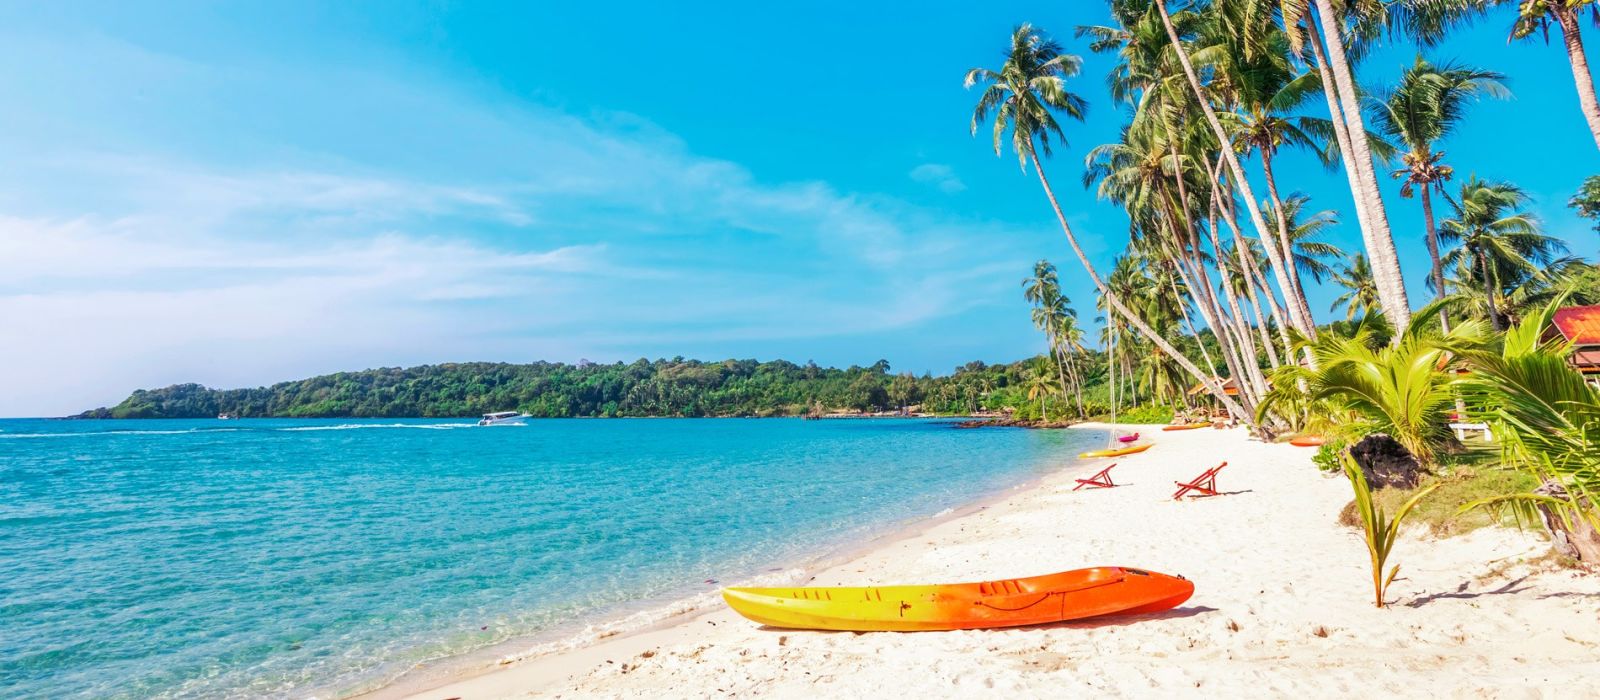 Exclusive Travel Tips for Phu Quoc Island in Vietnam